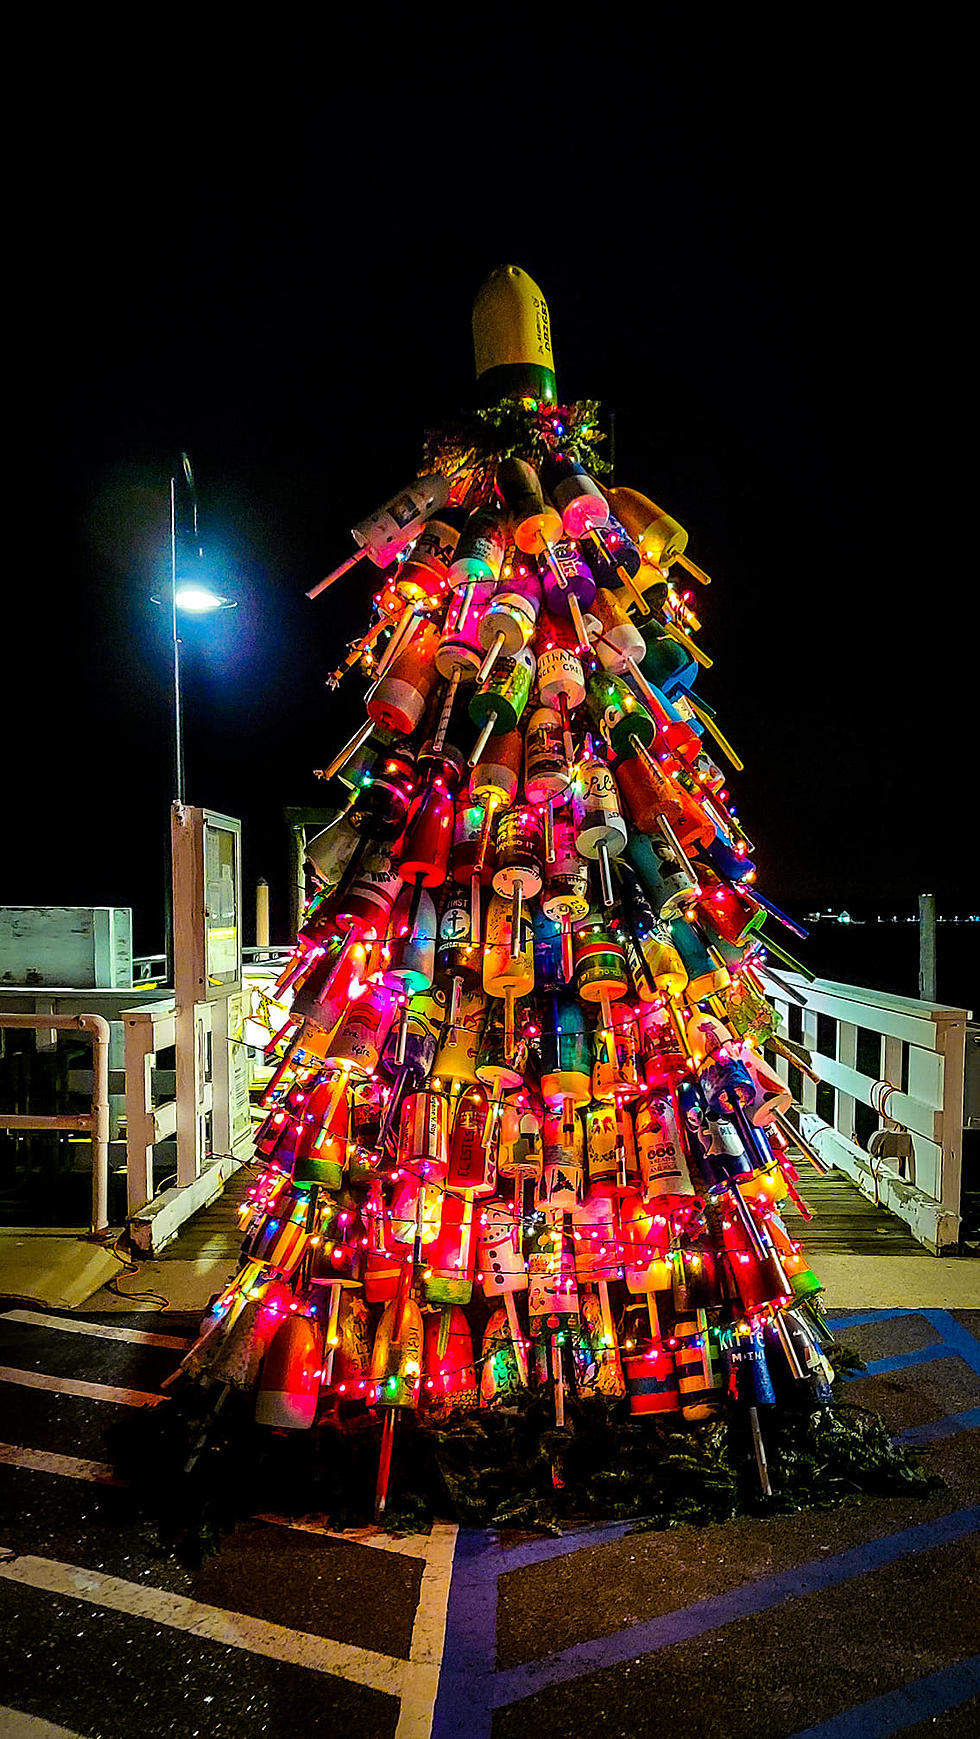 The Best Christmas Tree Ever is in Kittery, Maine